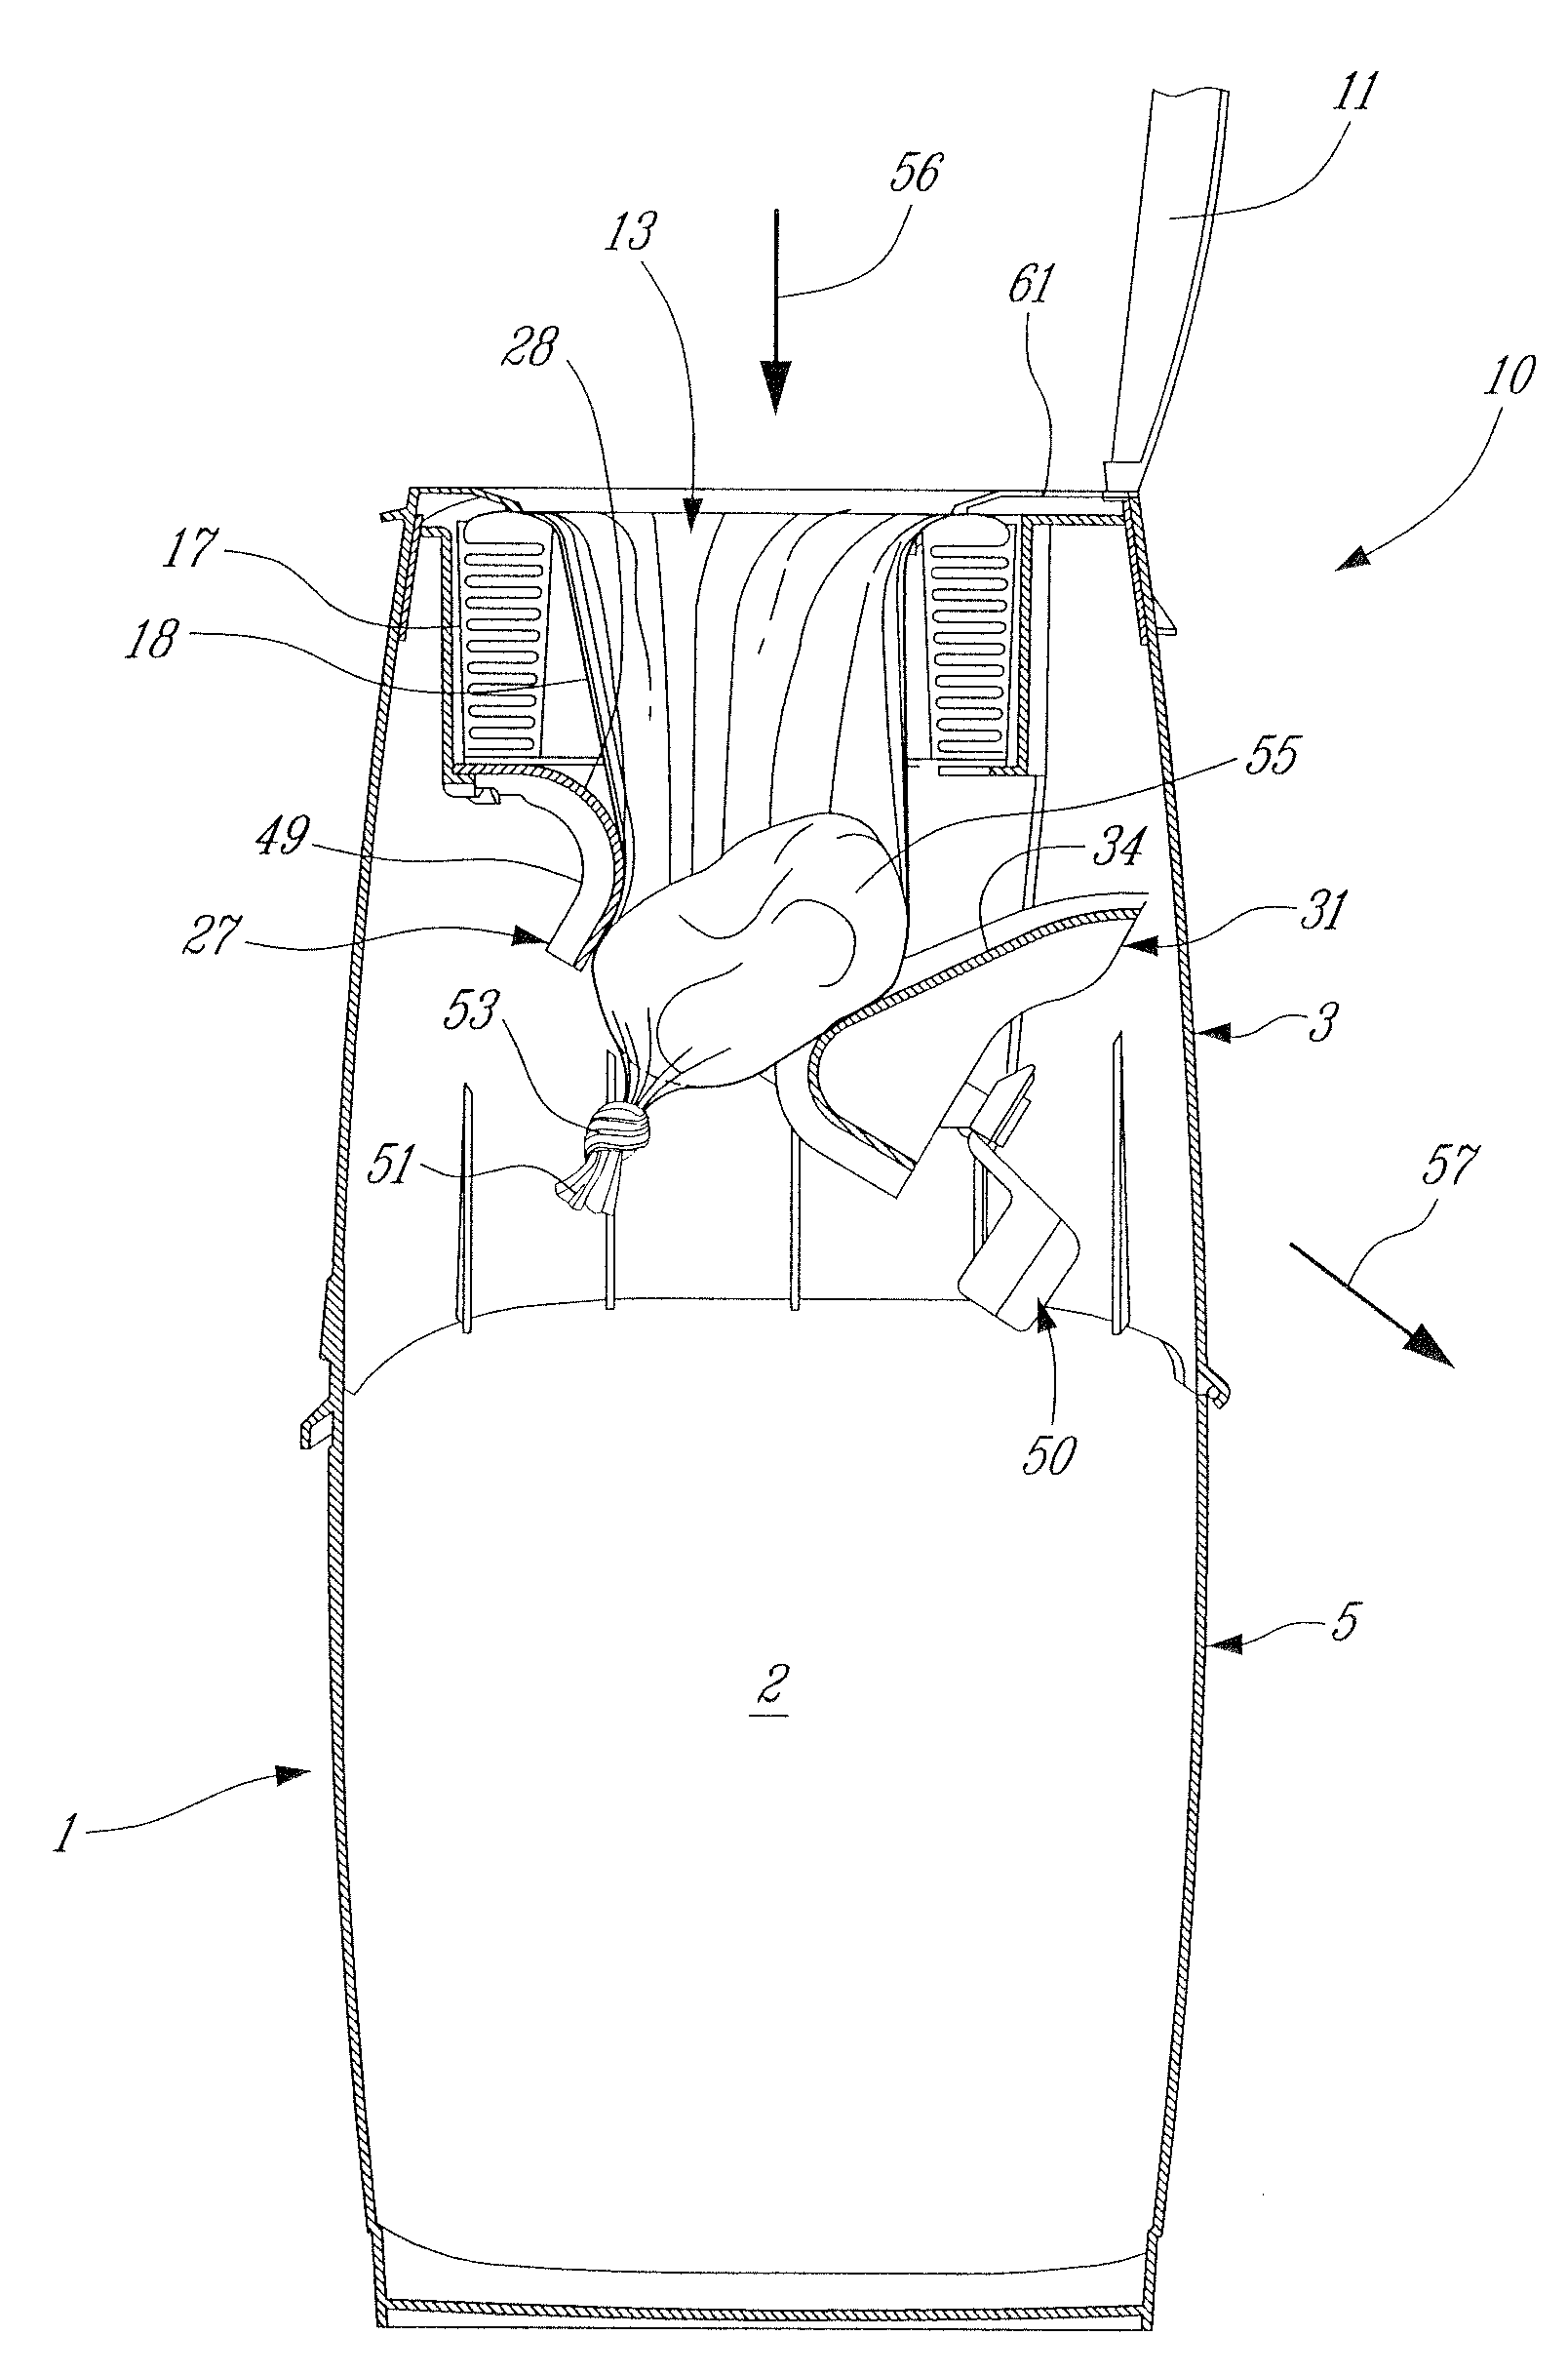 Apparatus for packing disposable objects into an elongated tube of flexible material